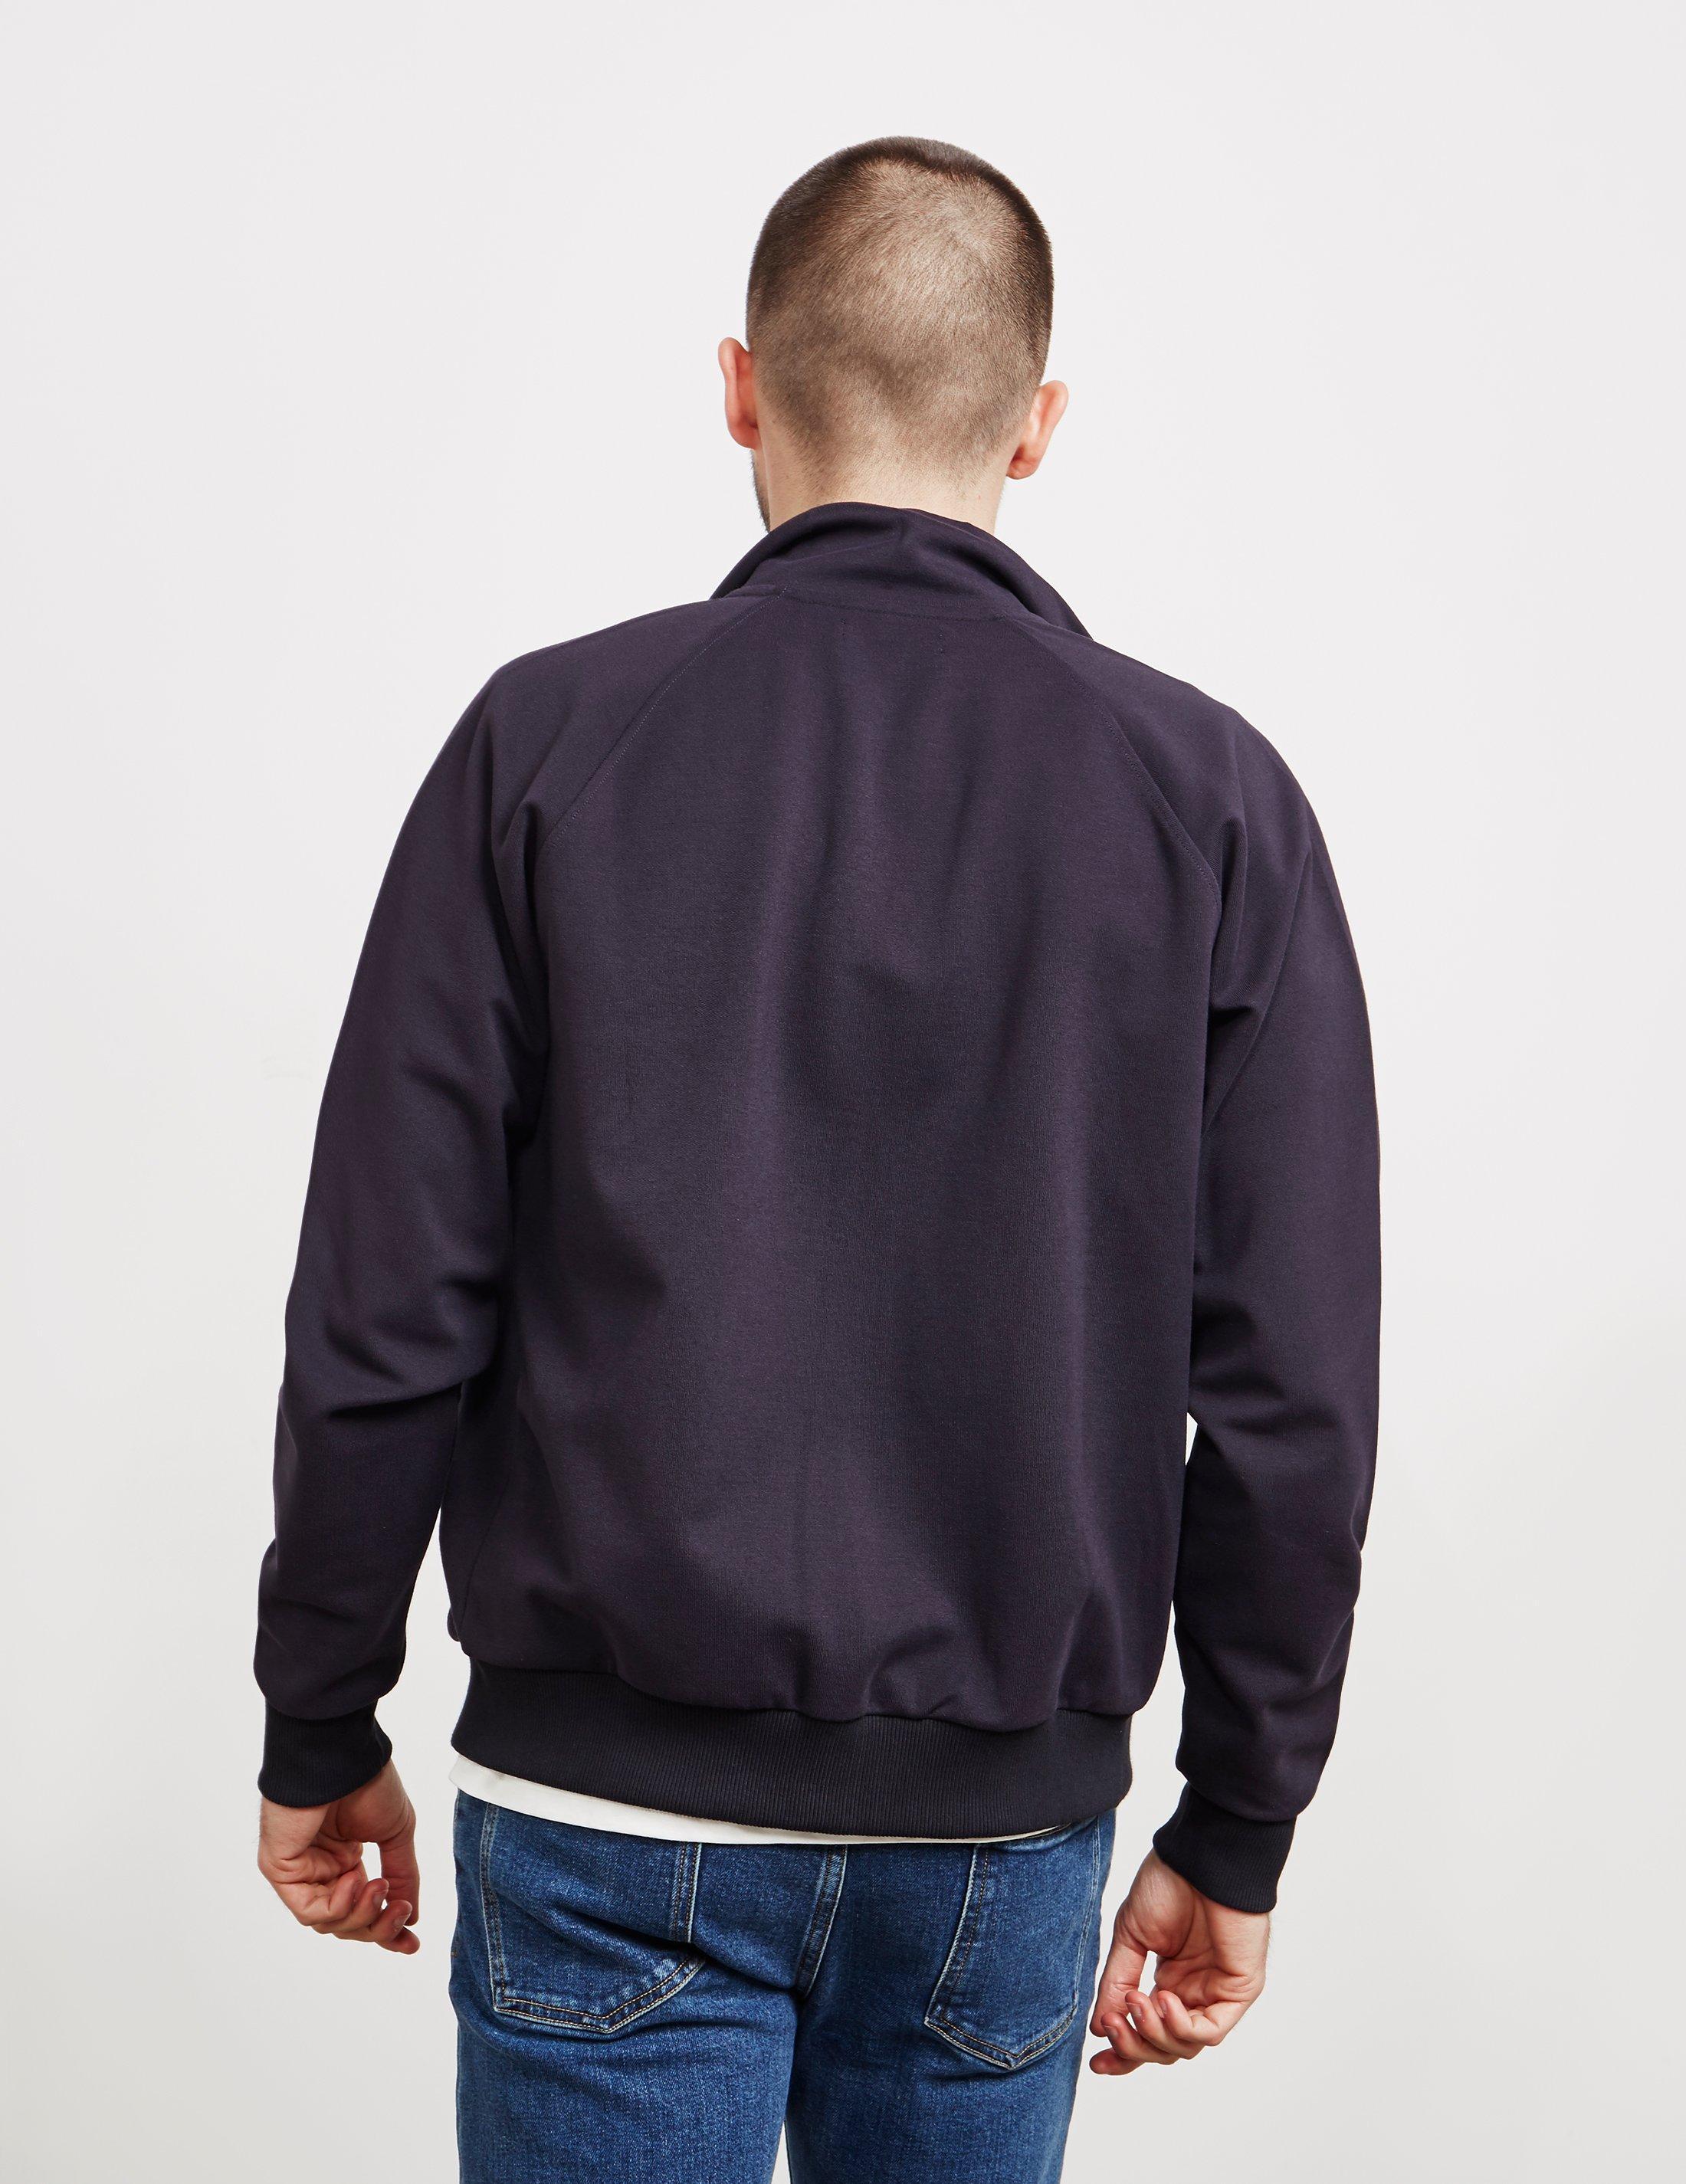 Fred Perry Utility Lightweight Track Jacket Navy Blue for Men - Lyst